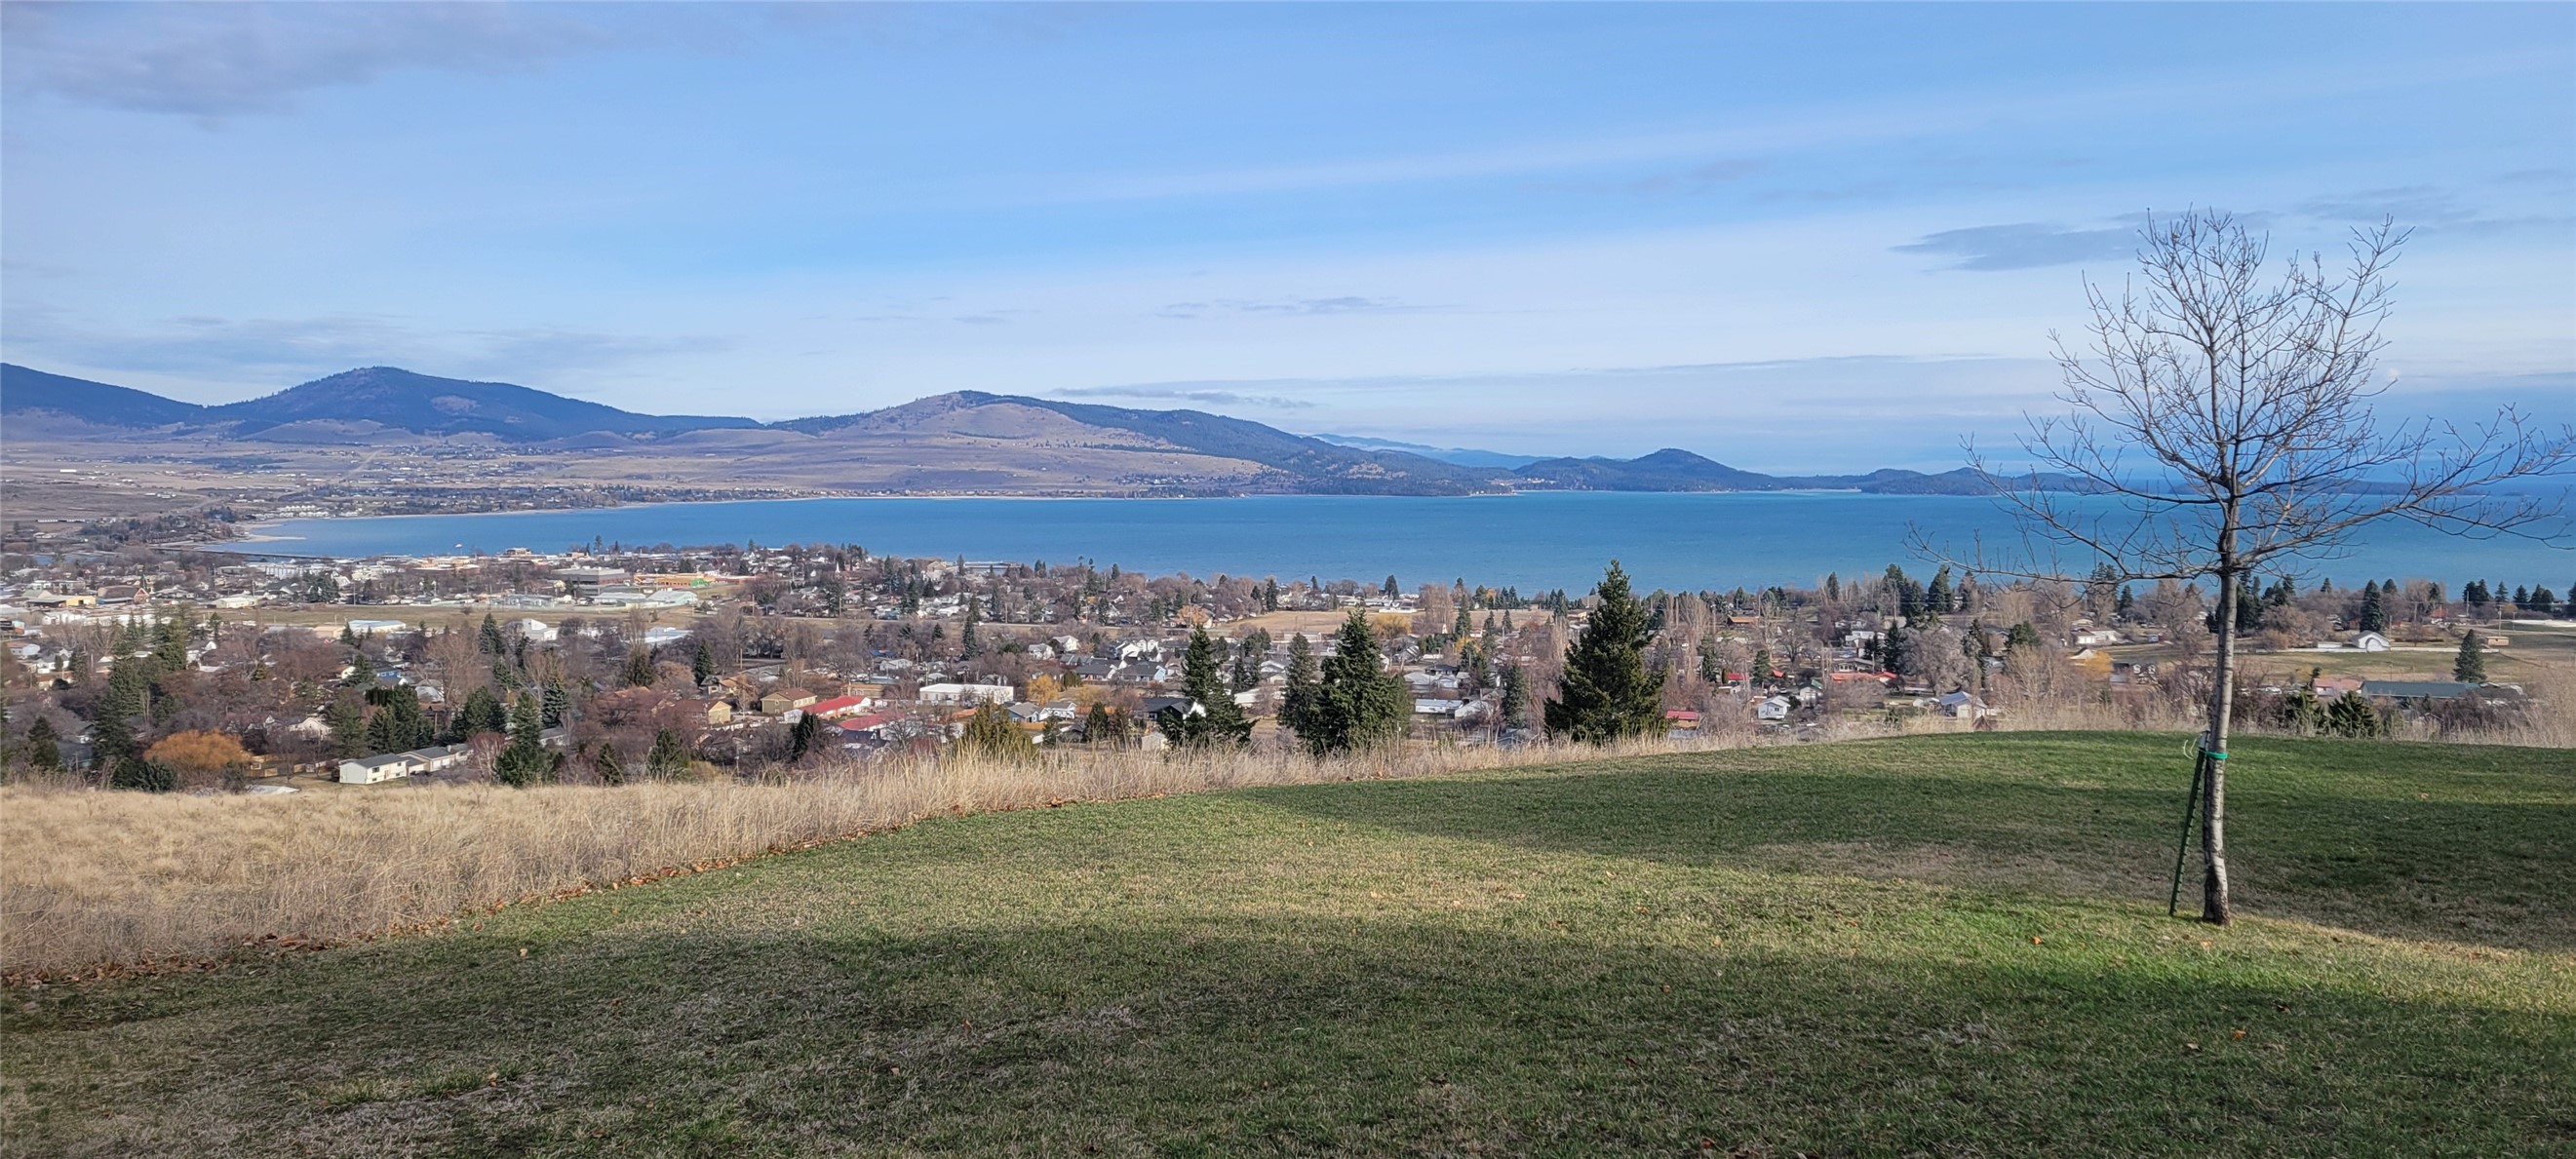 Few areas close-in to downtown offer quietude as well as superior views atop the sleepy town of Polson and across the an amazing expanse of Flathead Lake.  From this elevated and sunny location, the Mission Range is also quiet dramatic.  Claffey Drive is not a through street, but convenient to down town, as old town is about a mile, via safe walking trails on Skyline Drive into town and also miles south.  The land corridor that shoulders the northerly boundary is teeming with wildlife.  This place has large, mature deciduous trees, lilac stands, shrubs /flowers, and a fenced in back yard. Decks front and back, daylight walk out basement, fireplaces up and down, new roof,  detached double garage, paved drive. Traditional 80's style home.  It is dated, but with good bones, new roof, and a wood burning fireplace, rendering it a fierce contender in its price range.